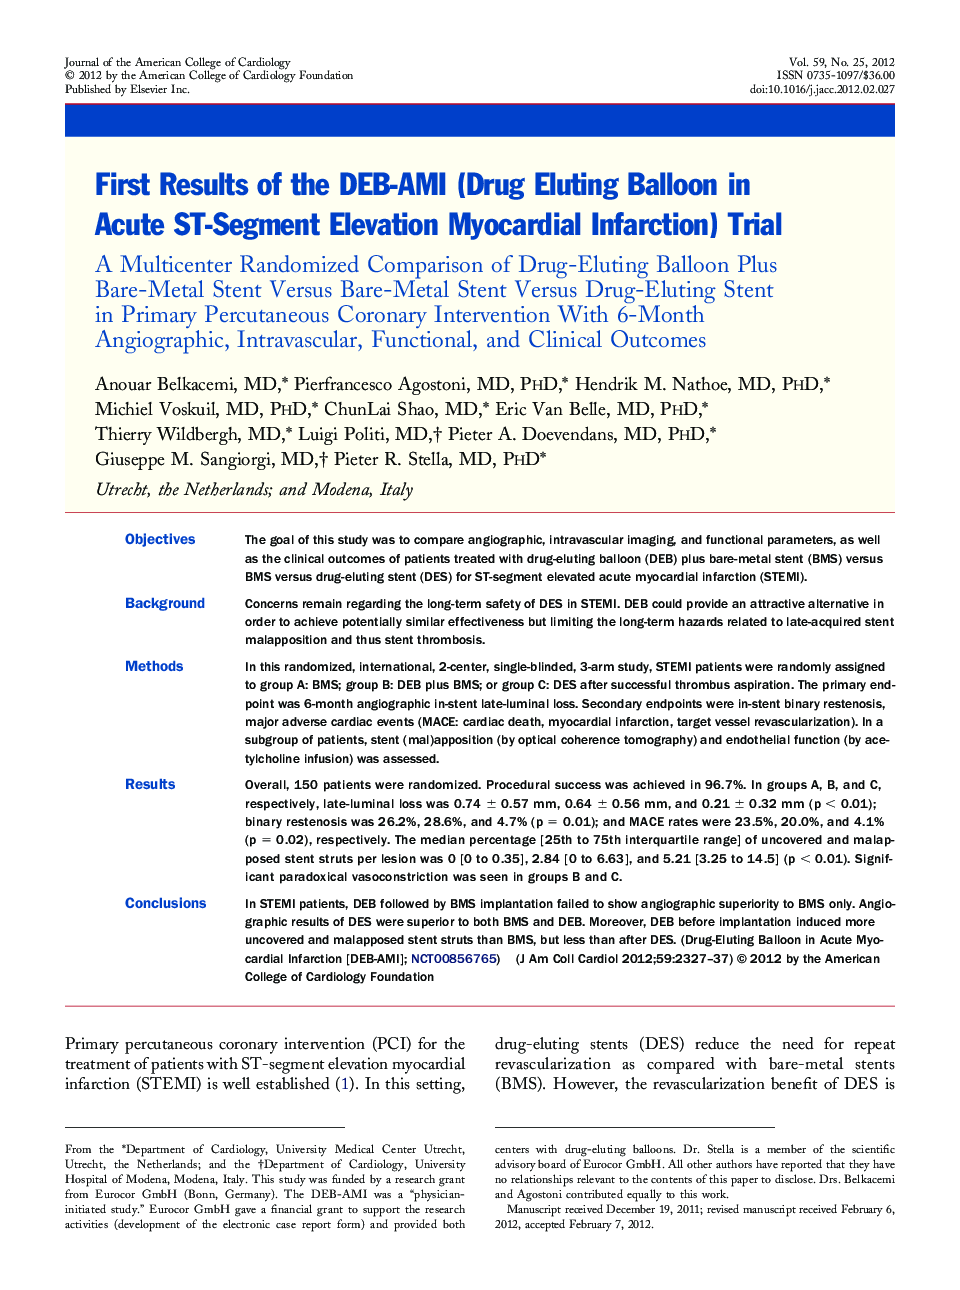 First Results of the DEB-AMI (Drug Eluting Balloon in Acute ST-Segment Elevation Myocardial Infarction) Trial : A Multicenter Randomized Comparison of Drug-Eluting Balloon Plus Bare-Metal Stent Versus Bare-Metal Stent Versus Drug-Eluting Stent in Primary 